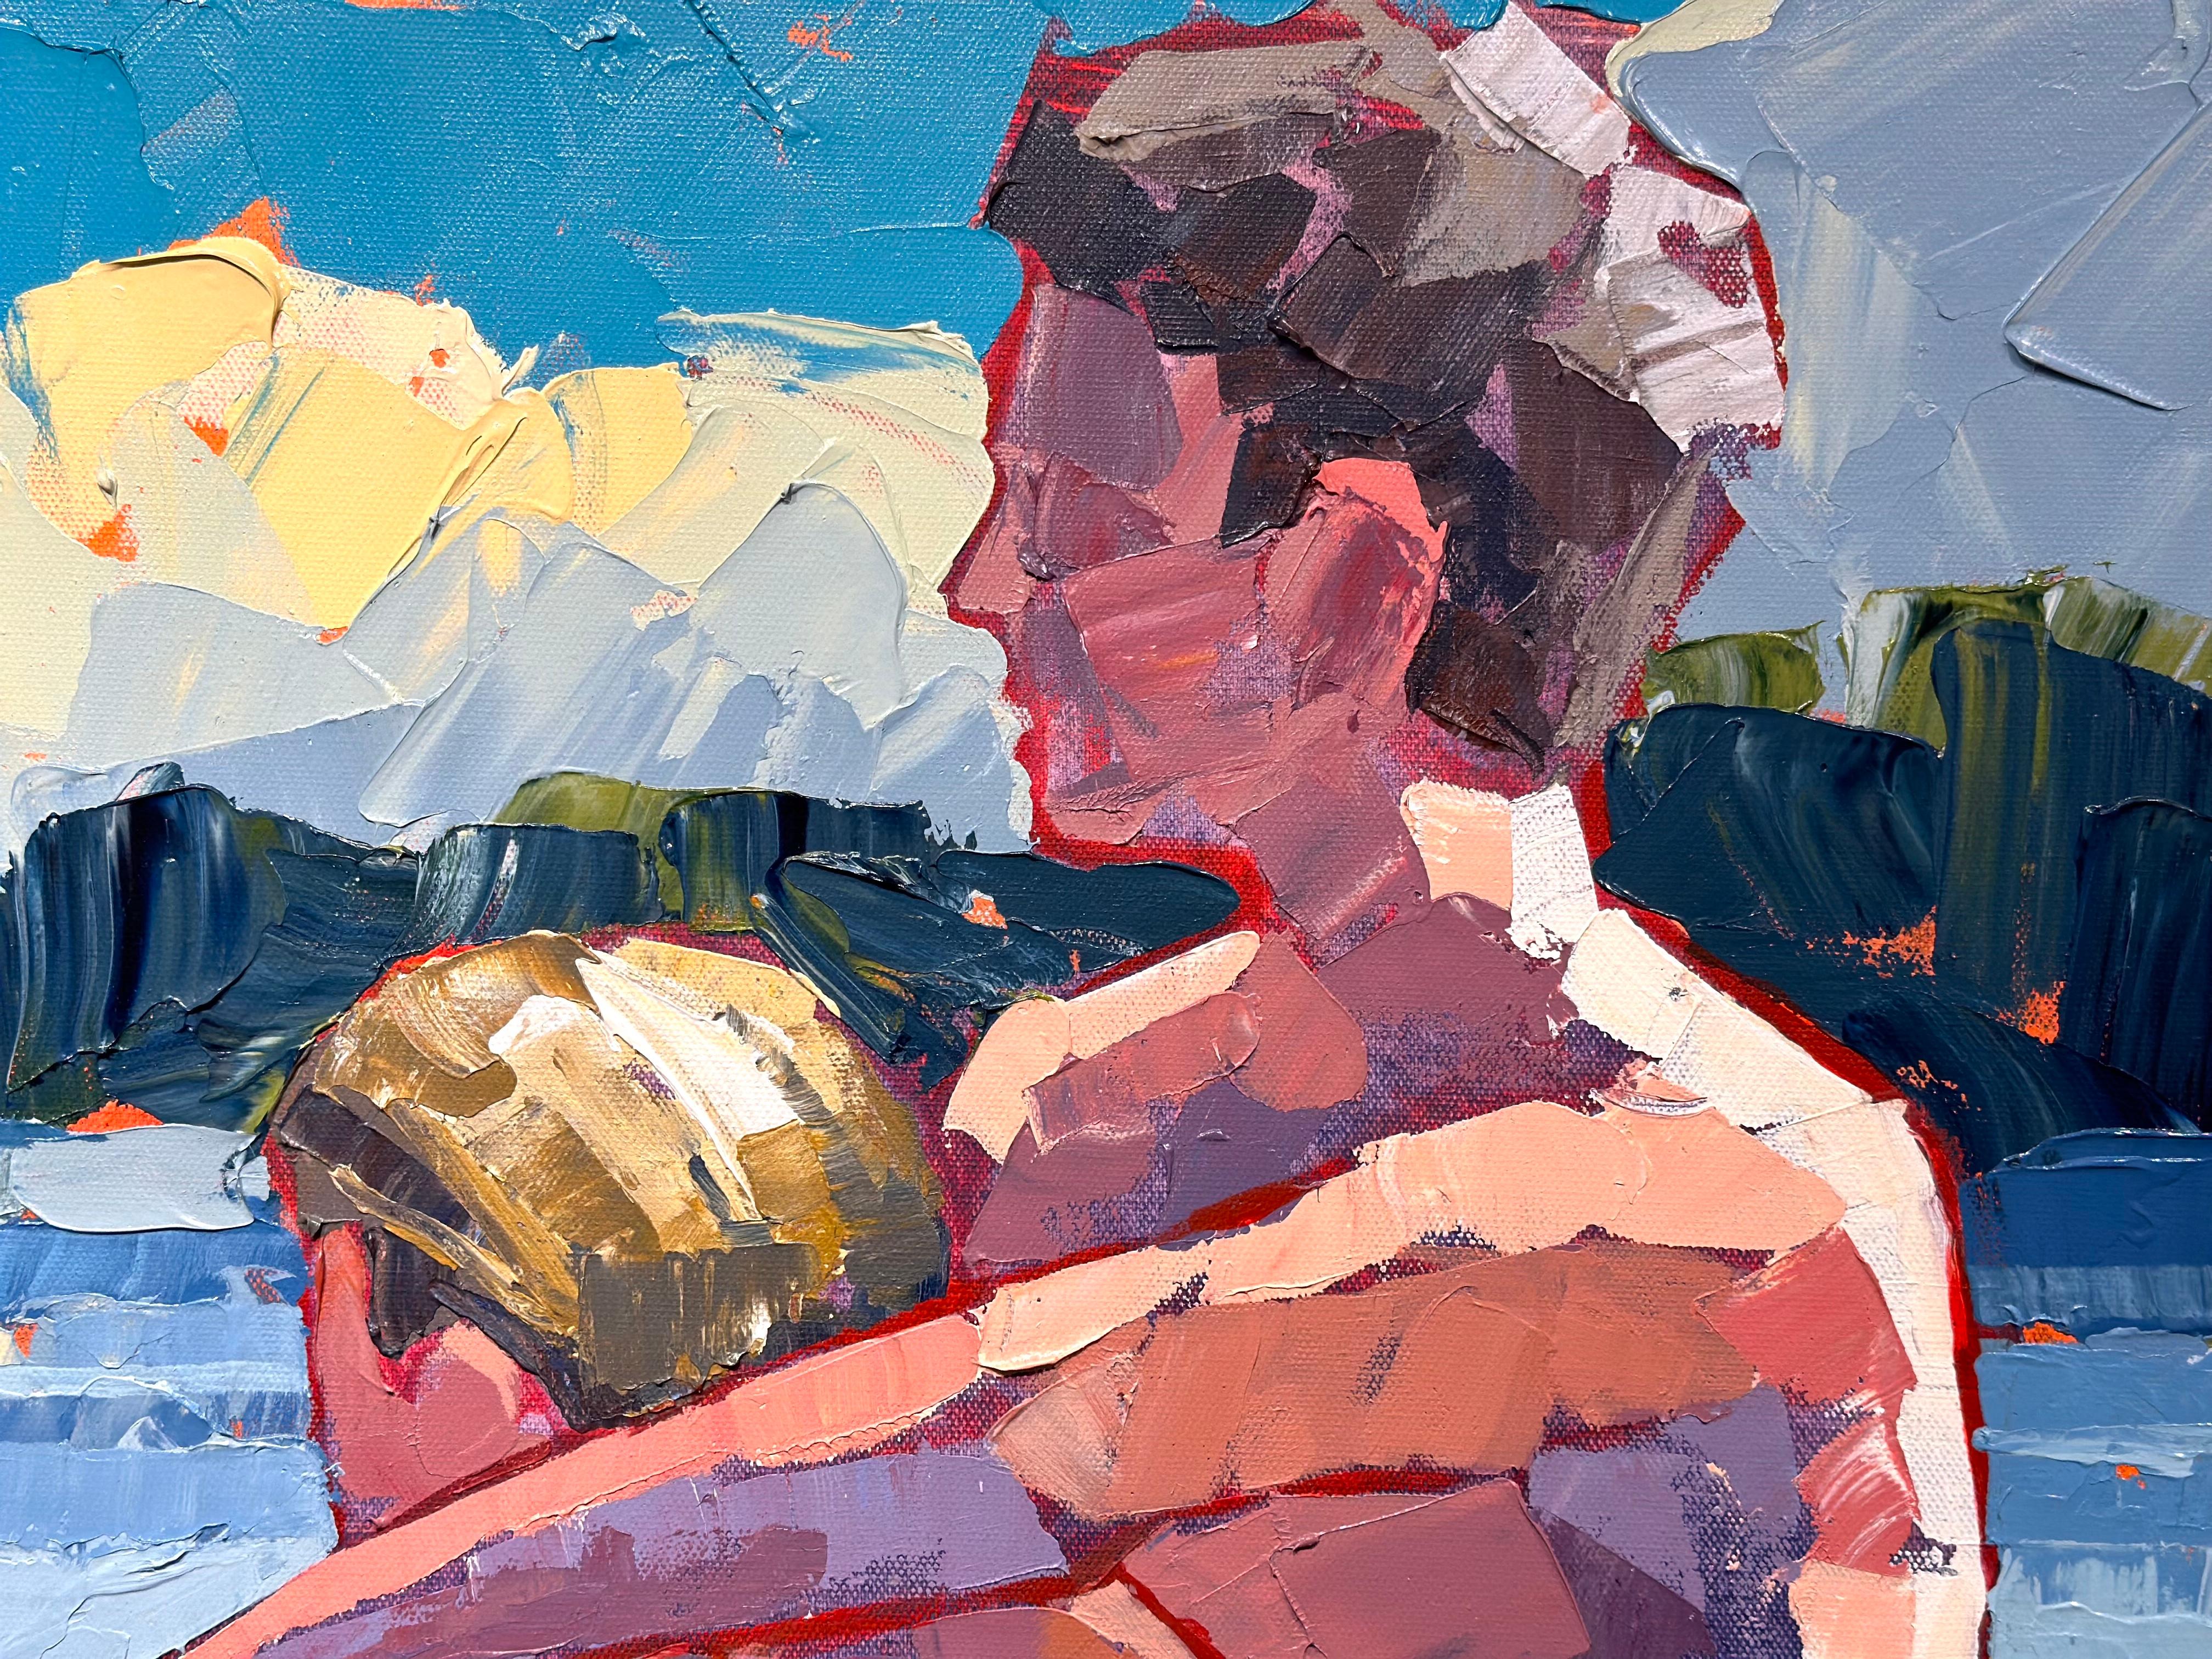 Paul Norwood paints the world around him, blurring the lines between representation and abstraction. His loose, gestural style and bold, thick brushwork suggest rather than define forms, creating sensation without being overly insistent. The